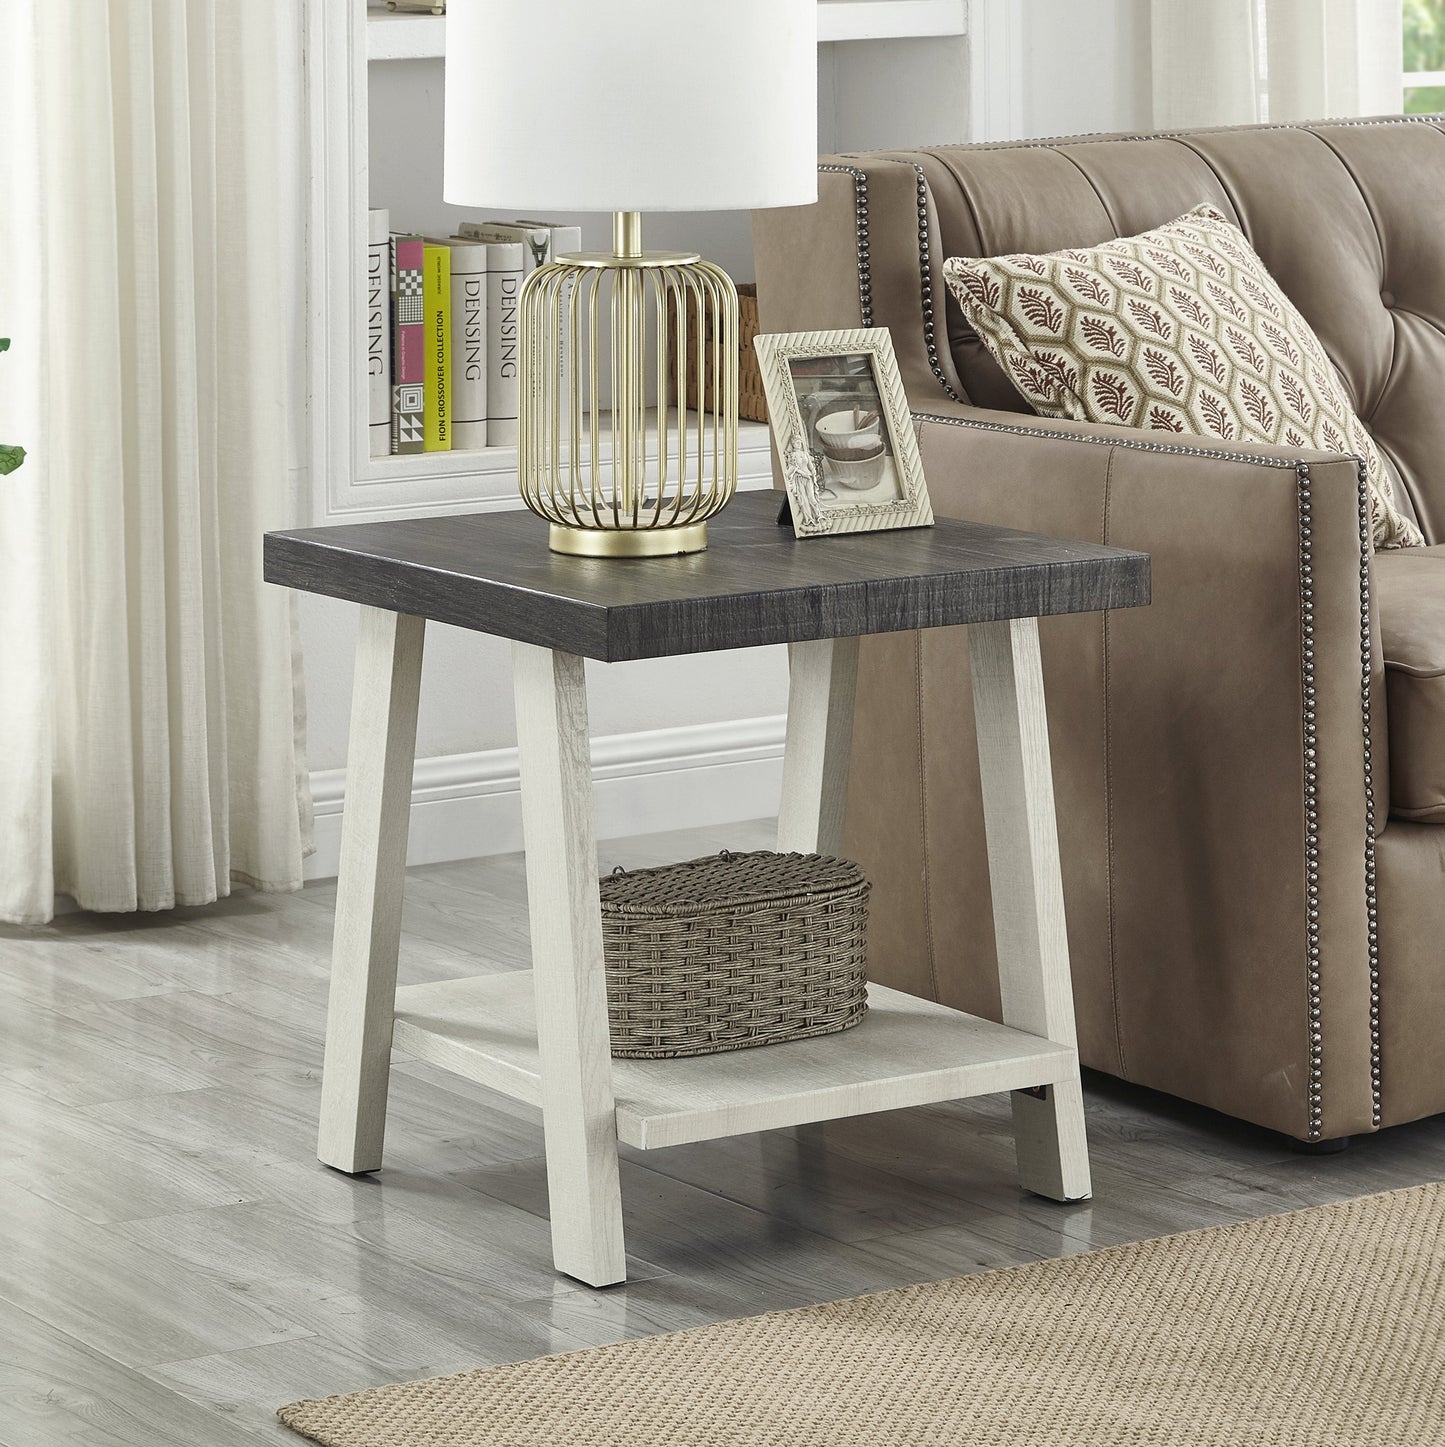 Athens Contemporary Two-Tone Wood Shelf End Table in Weathered Charcoal and Beige